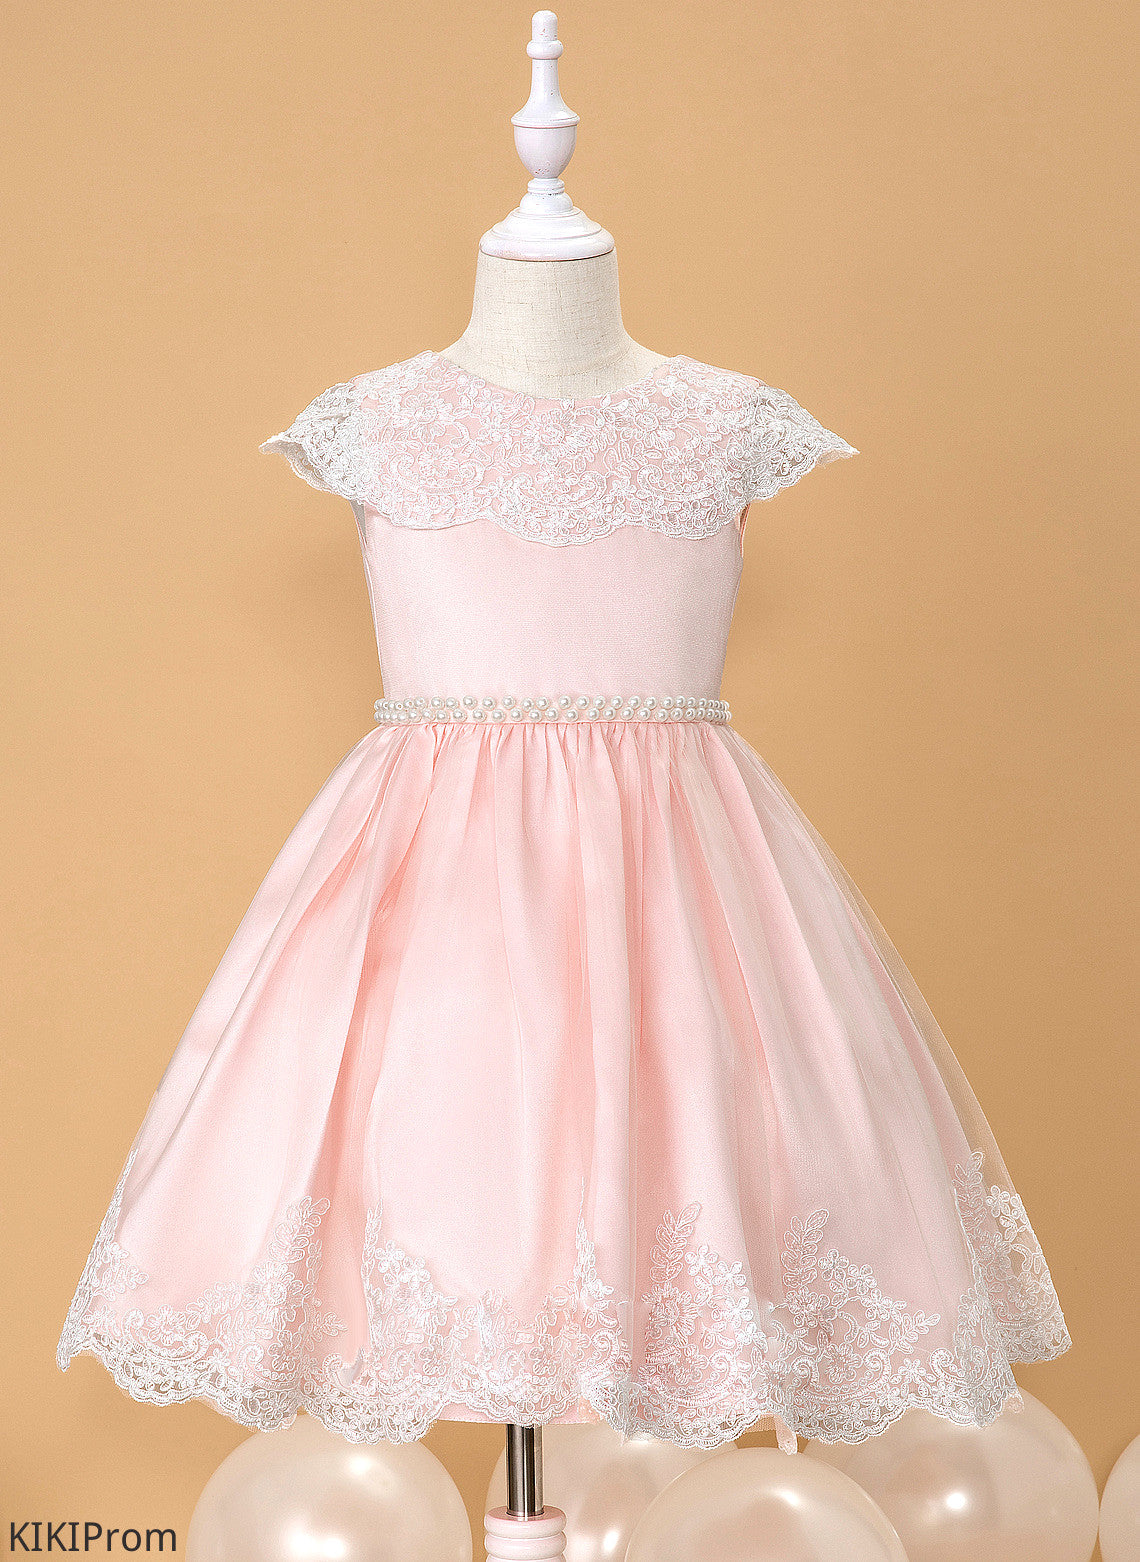 Reagan Sleeveless Dress Ball-Gown/Princess Neck - Flower Girl Knee-length Flower Girl Dresses Beading/Bow(s) Scoop Satin/Lace With